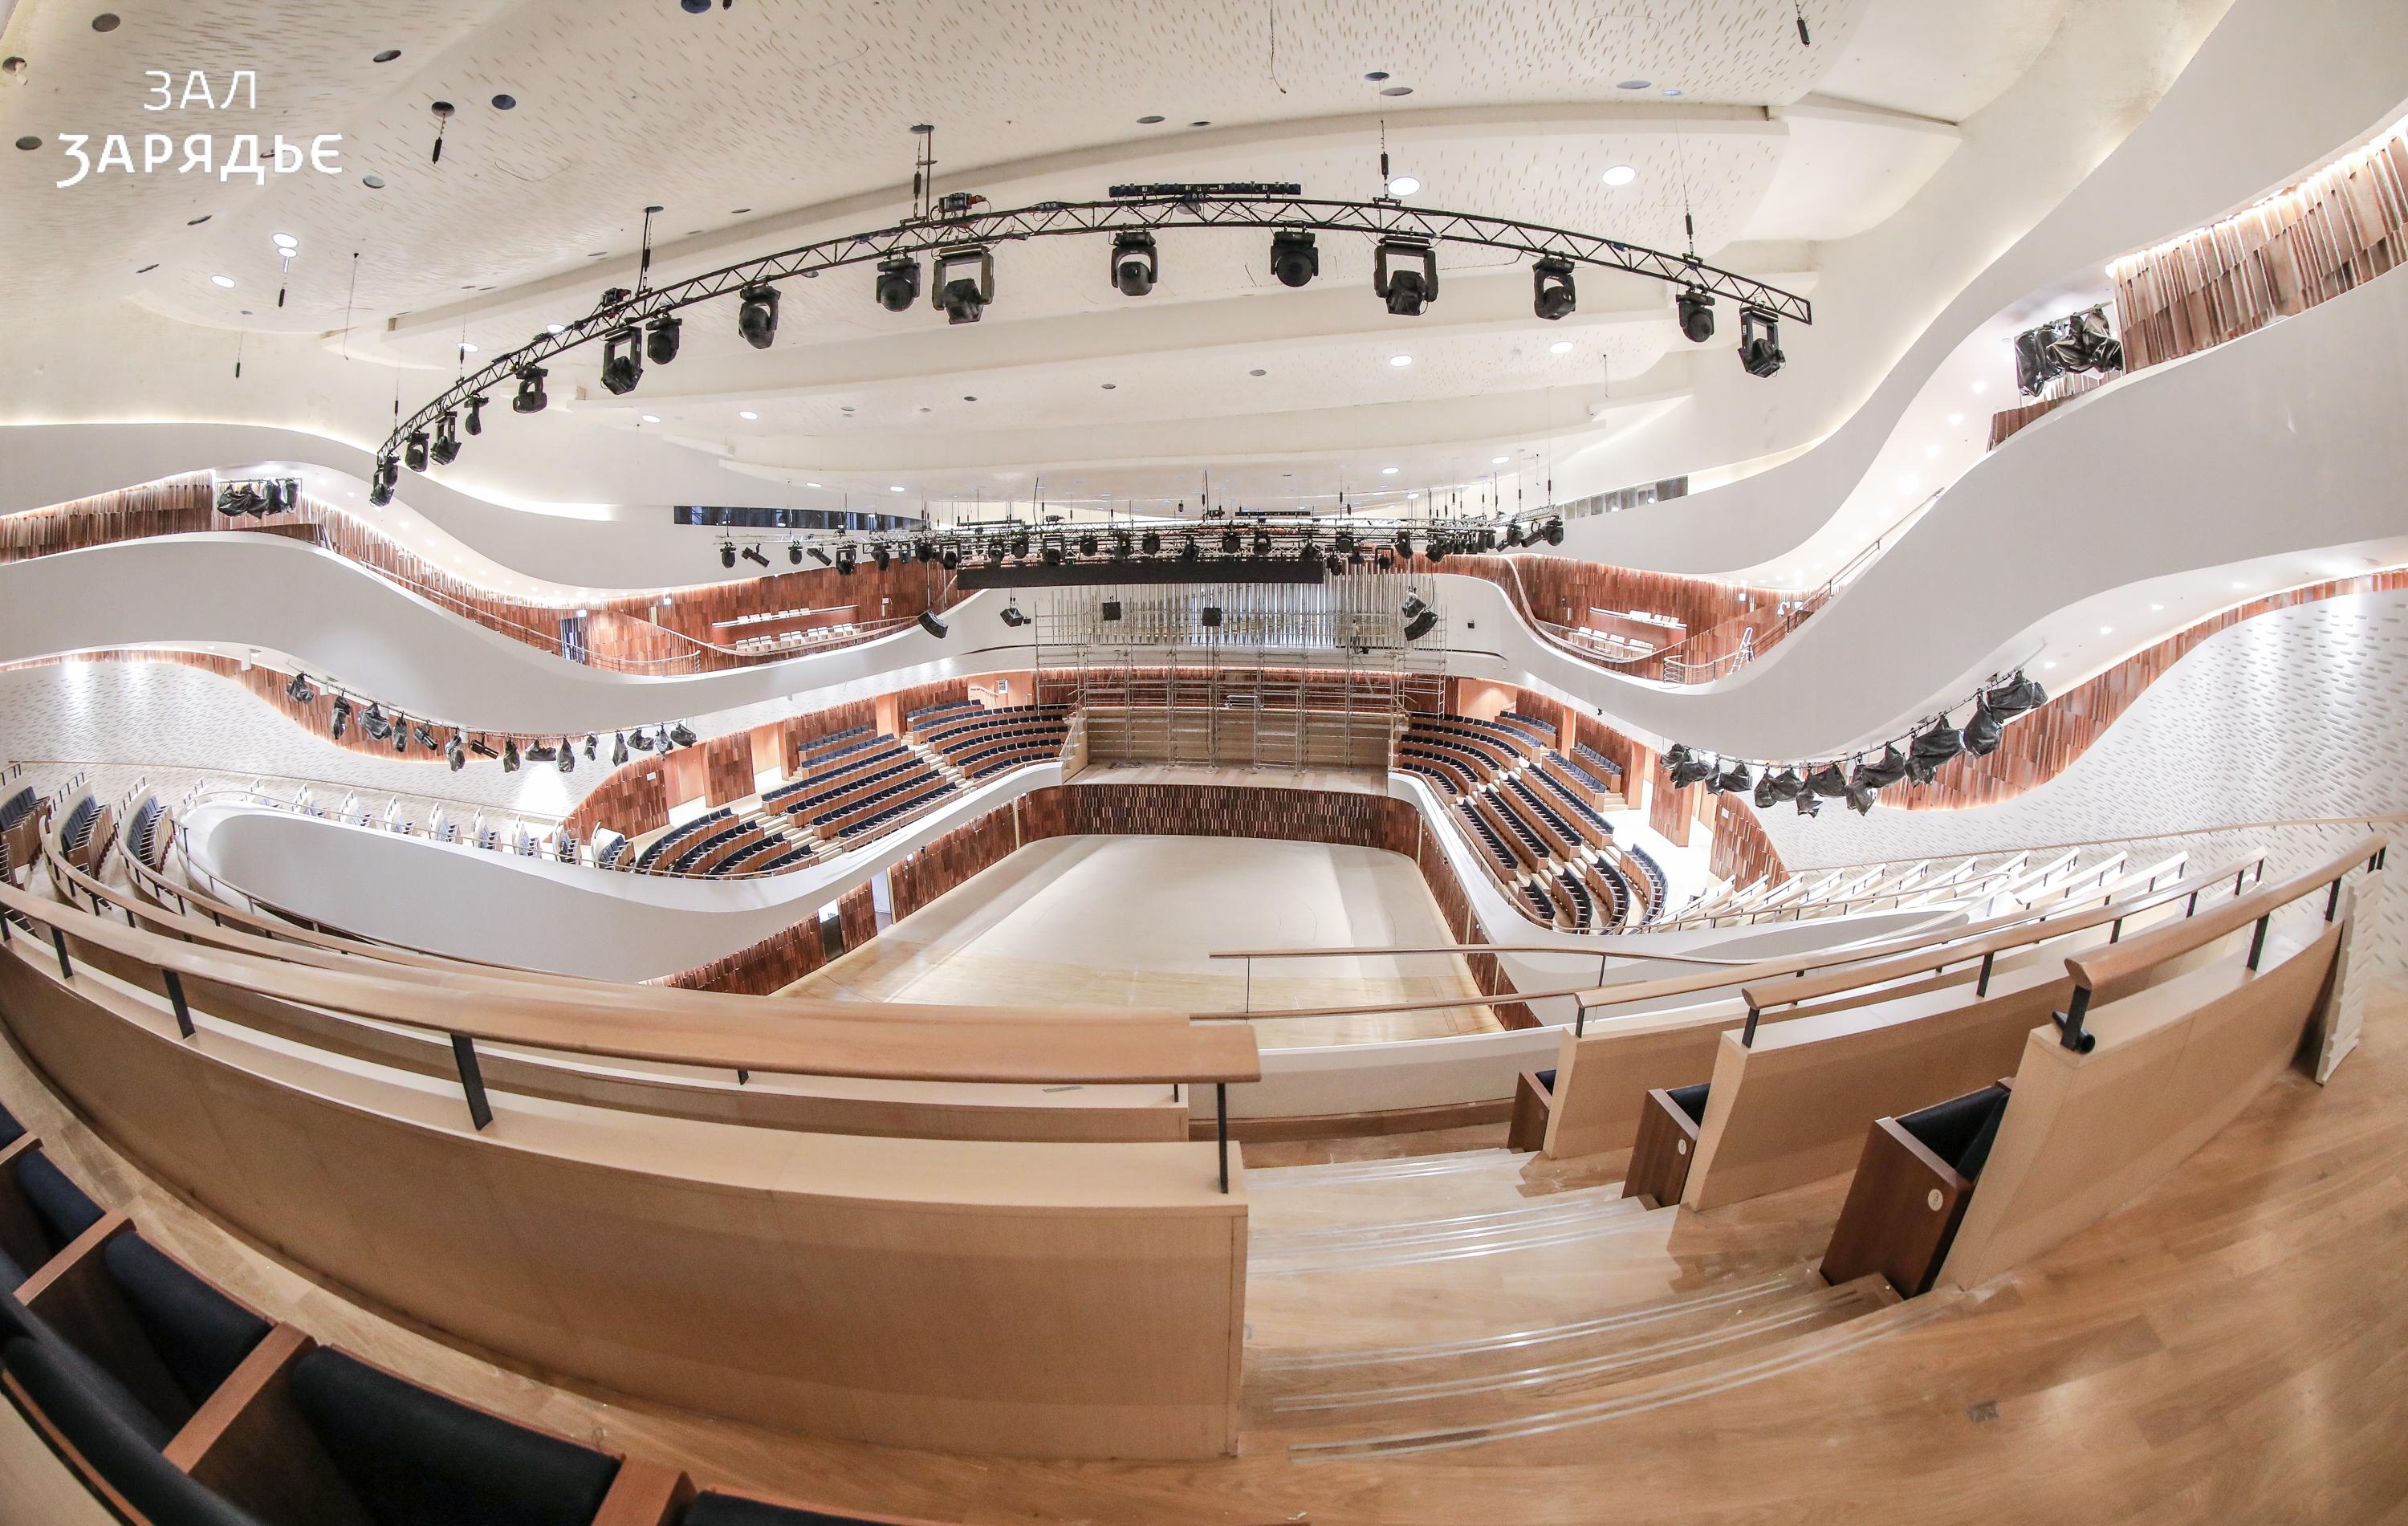 Sightseeing concert hall tour